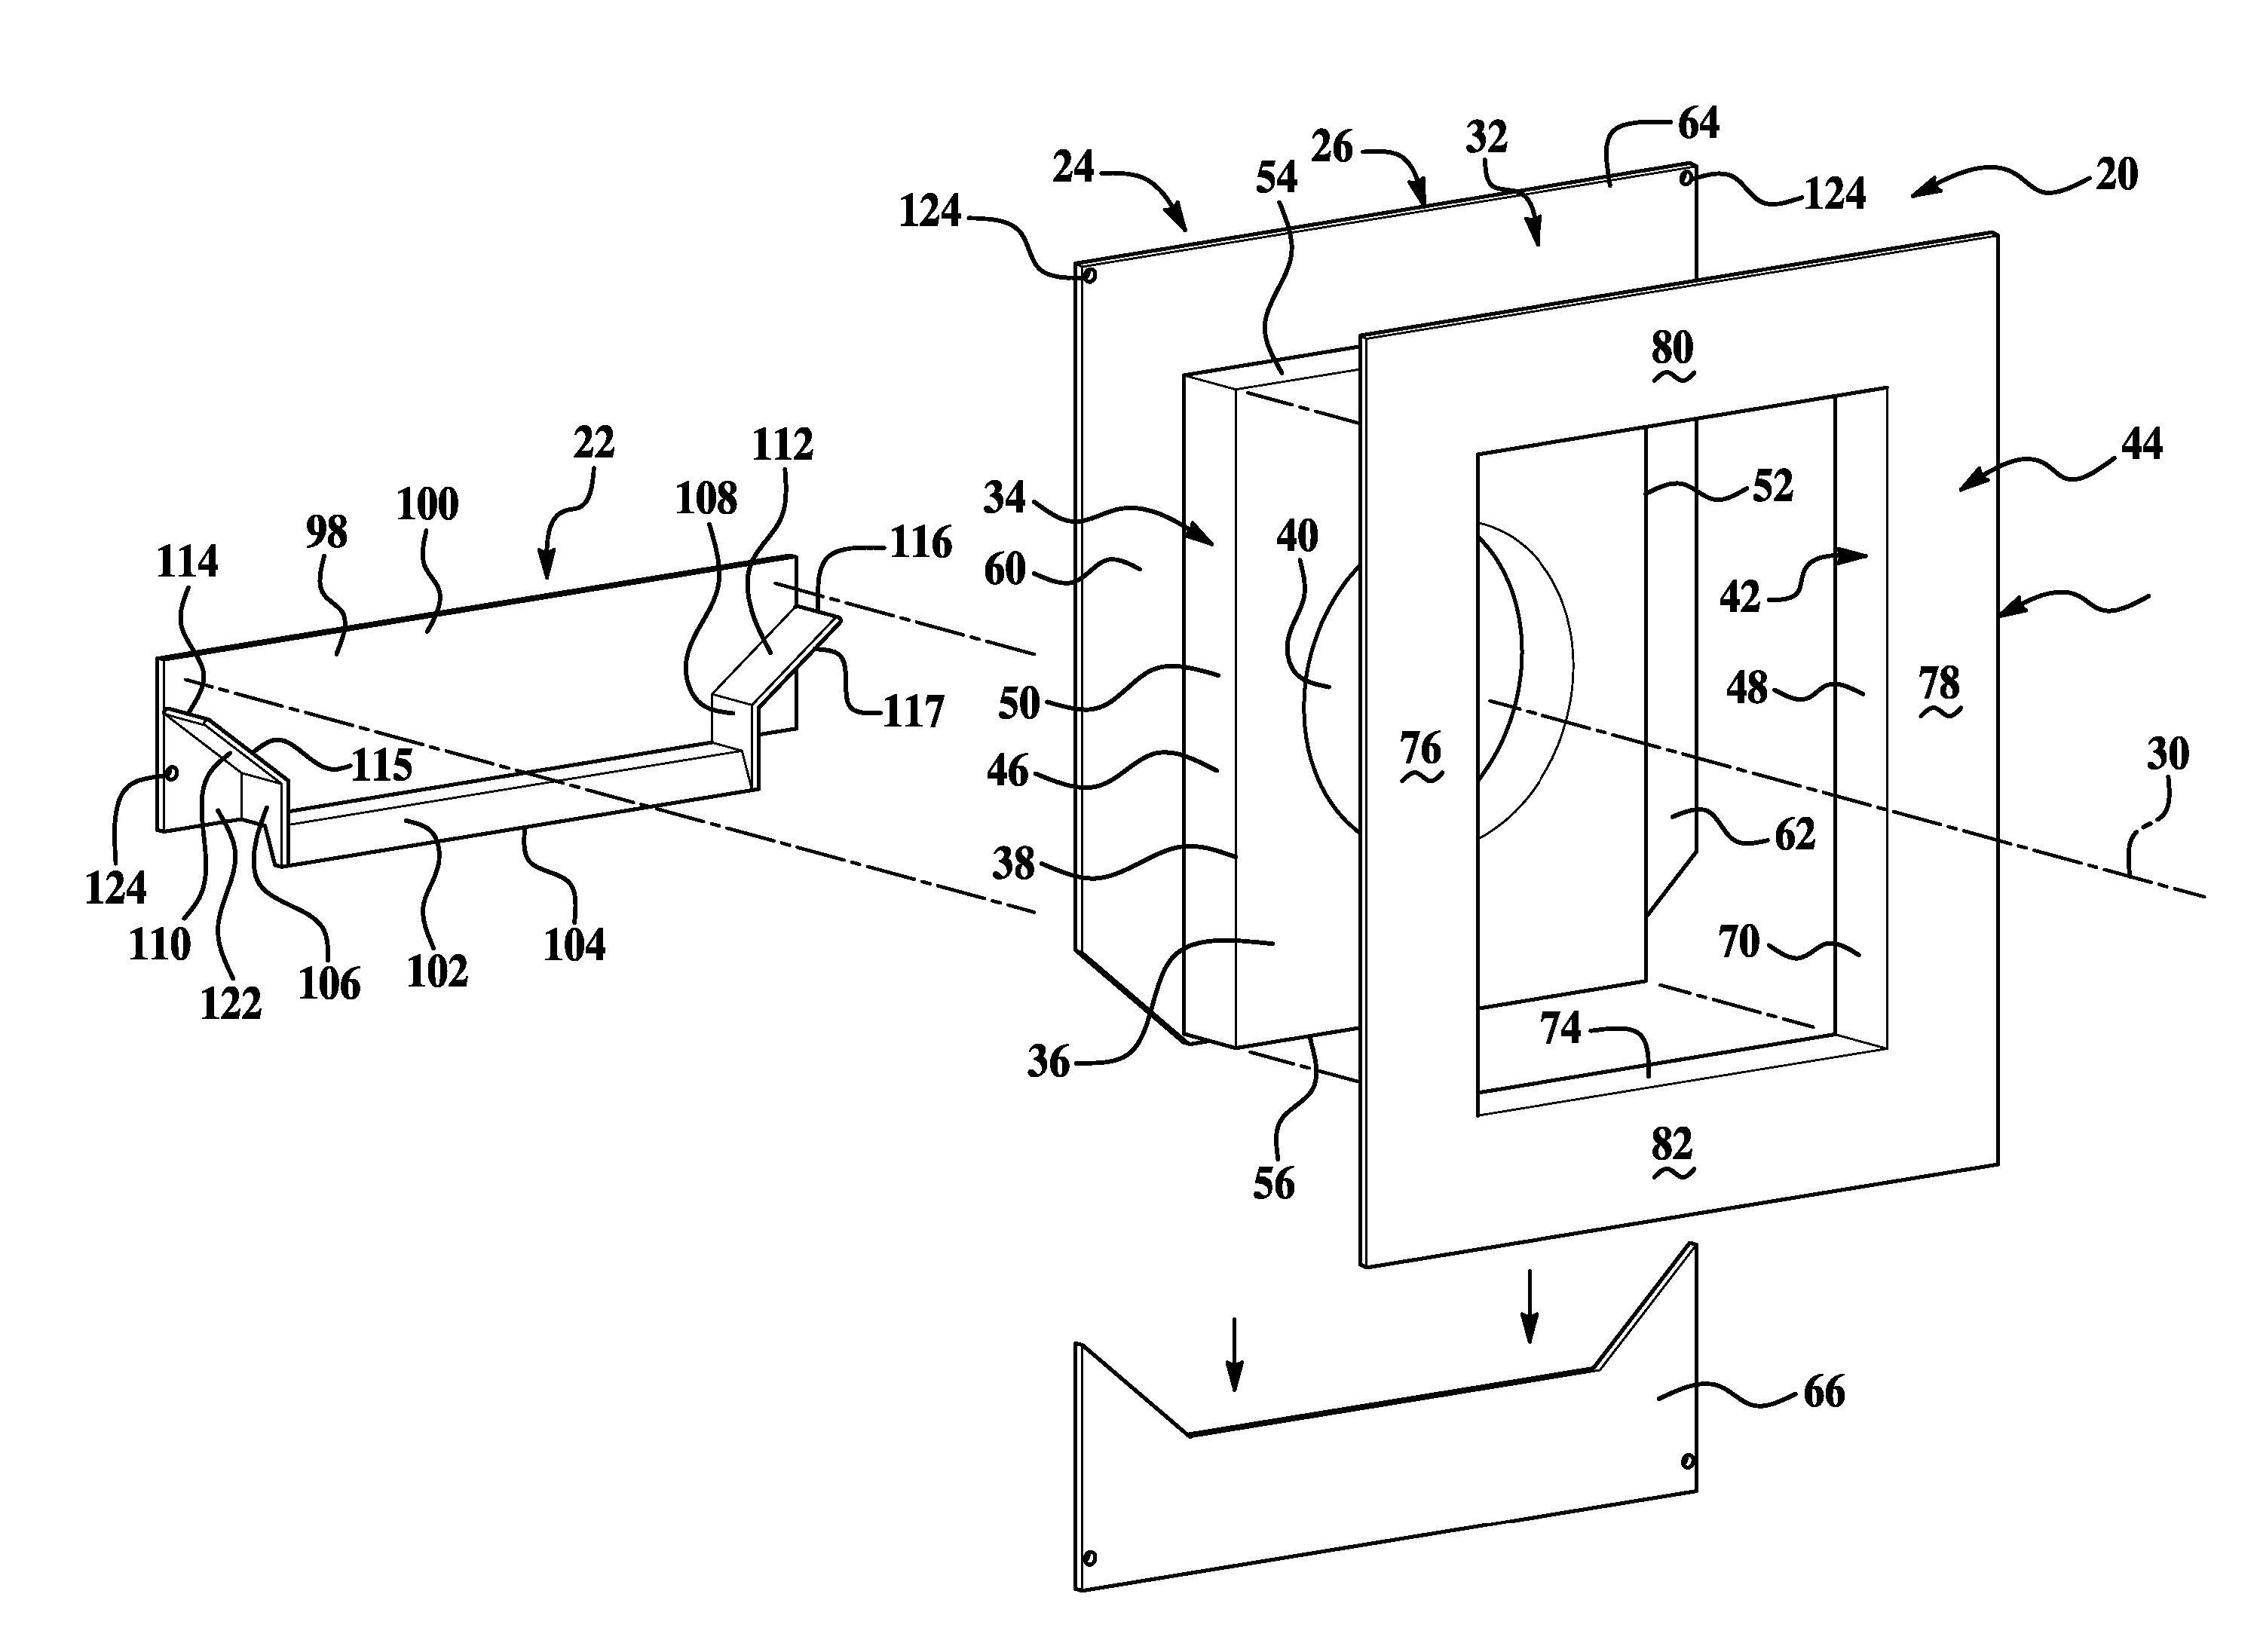 Exterior siding mounting bracket assembly and method of assembly